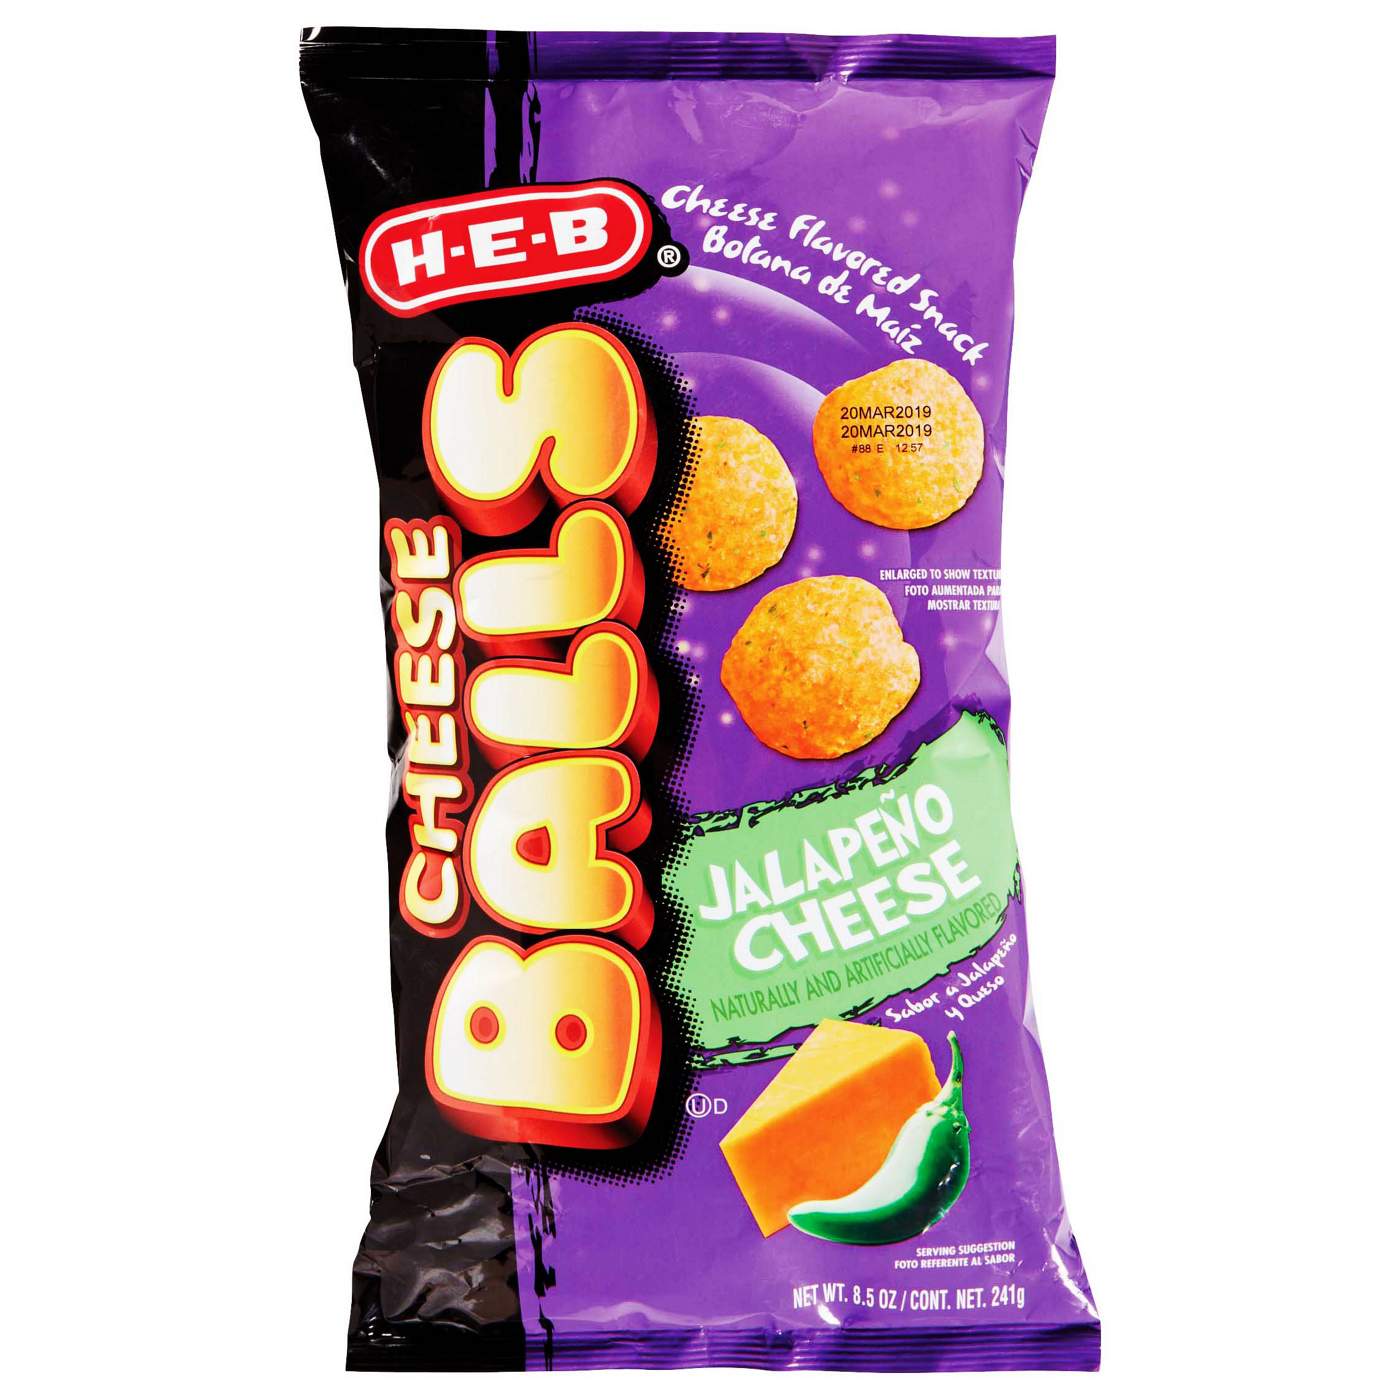 H-E-B Jalapeño Cheese-Flavored Cheese Balls; image 1 of 2